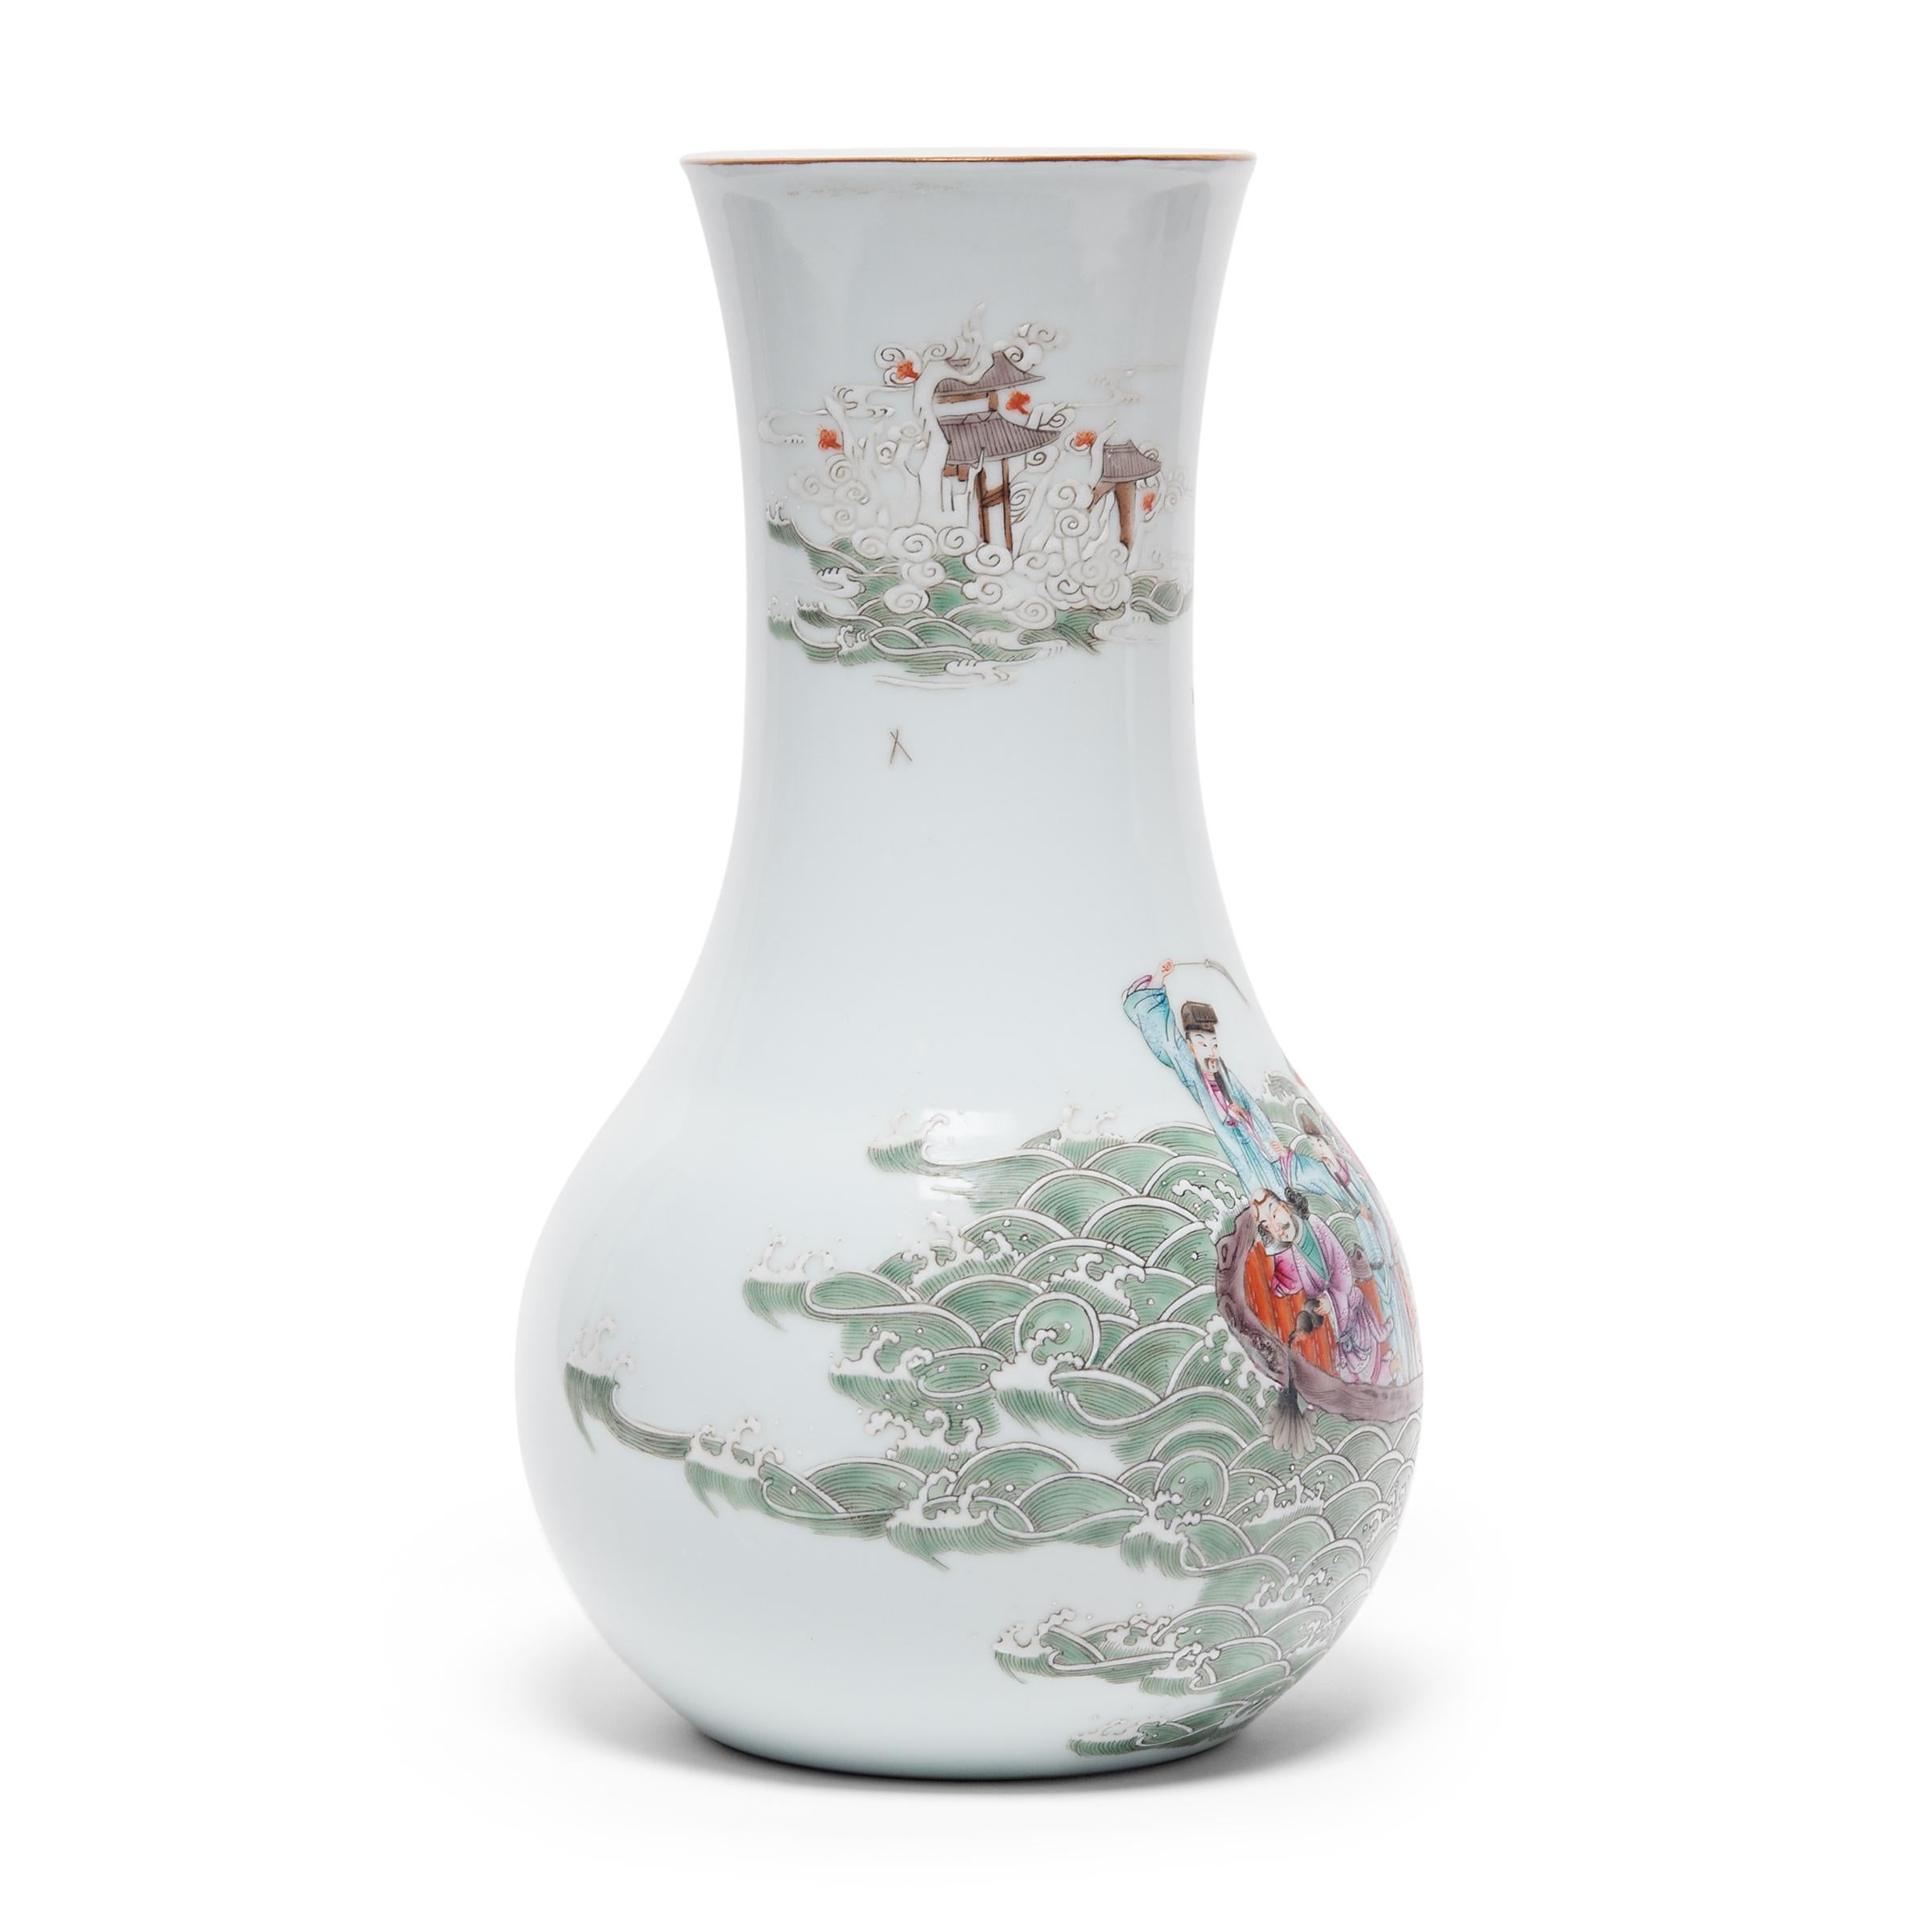 Retro Vase Chinese Famille Rose Eight Immortals Character Vase 6.5 Inch Home Decoration